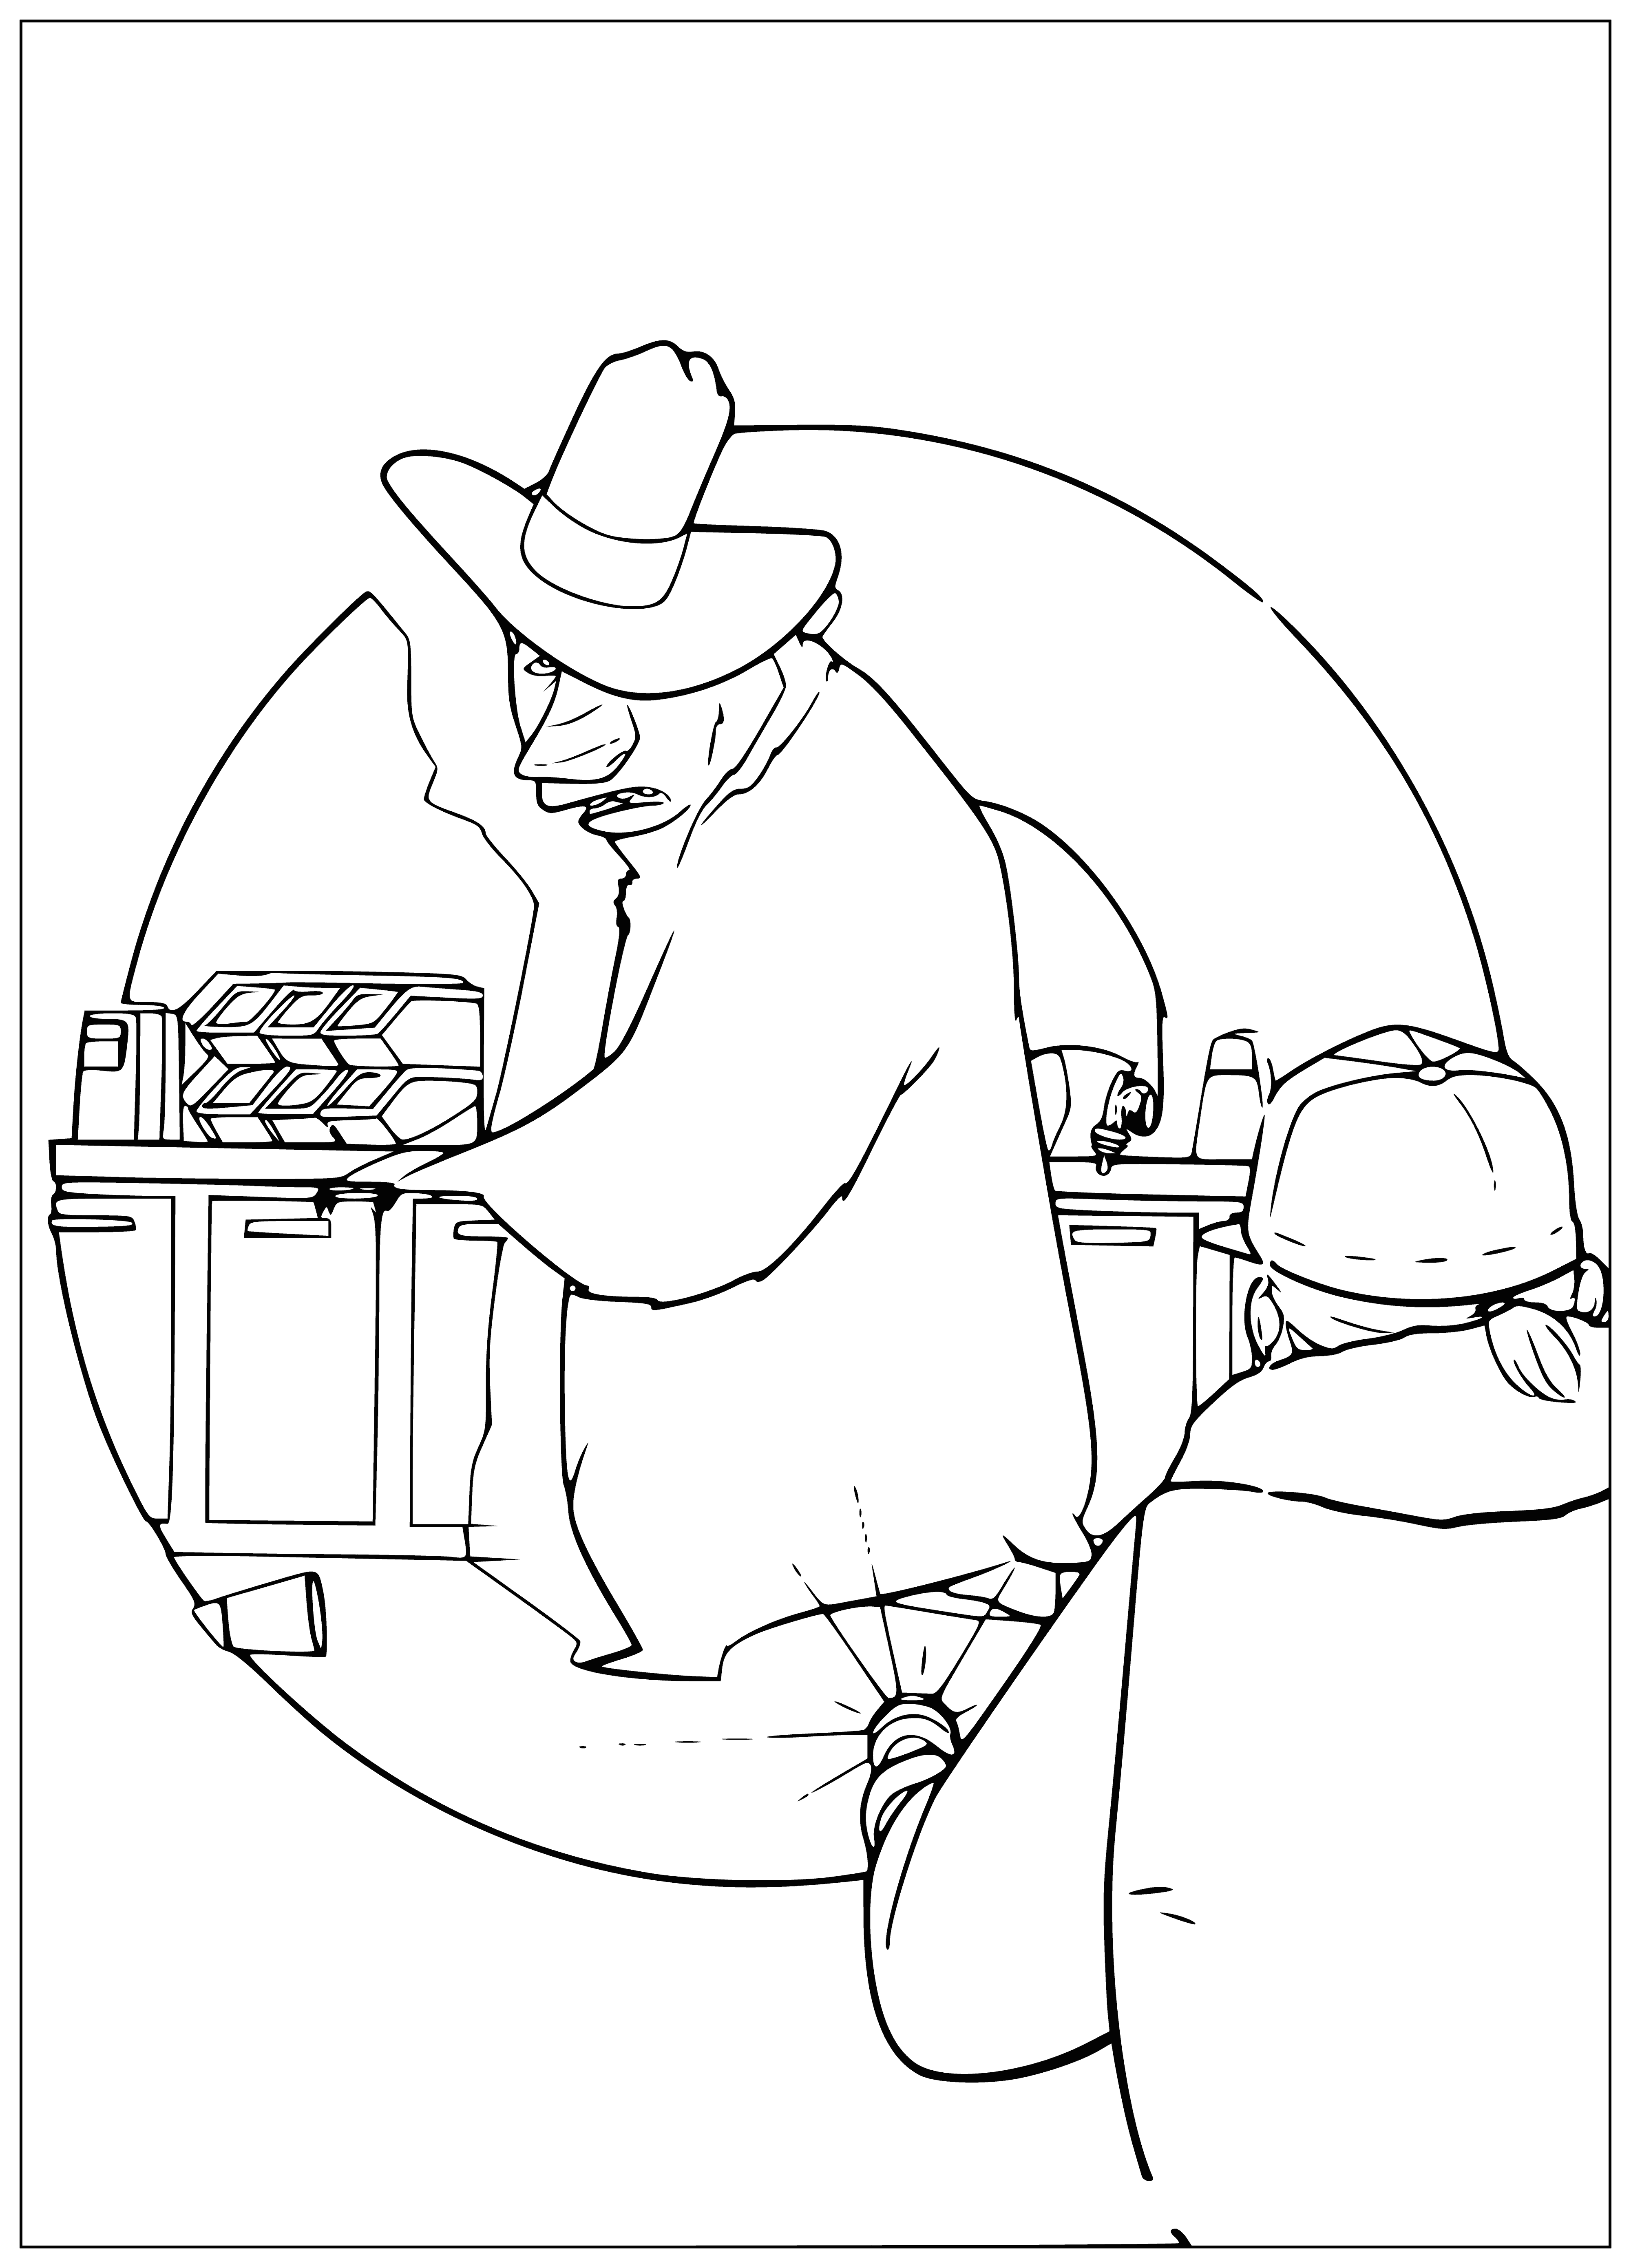 Sheriff coloring page